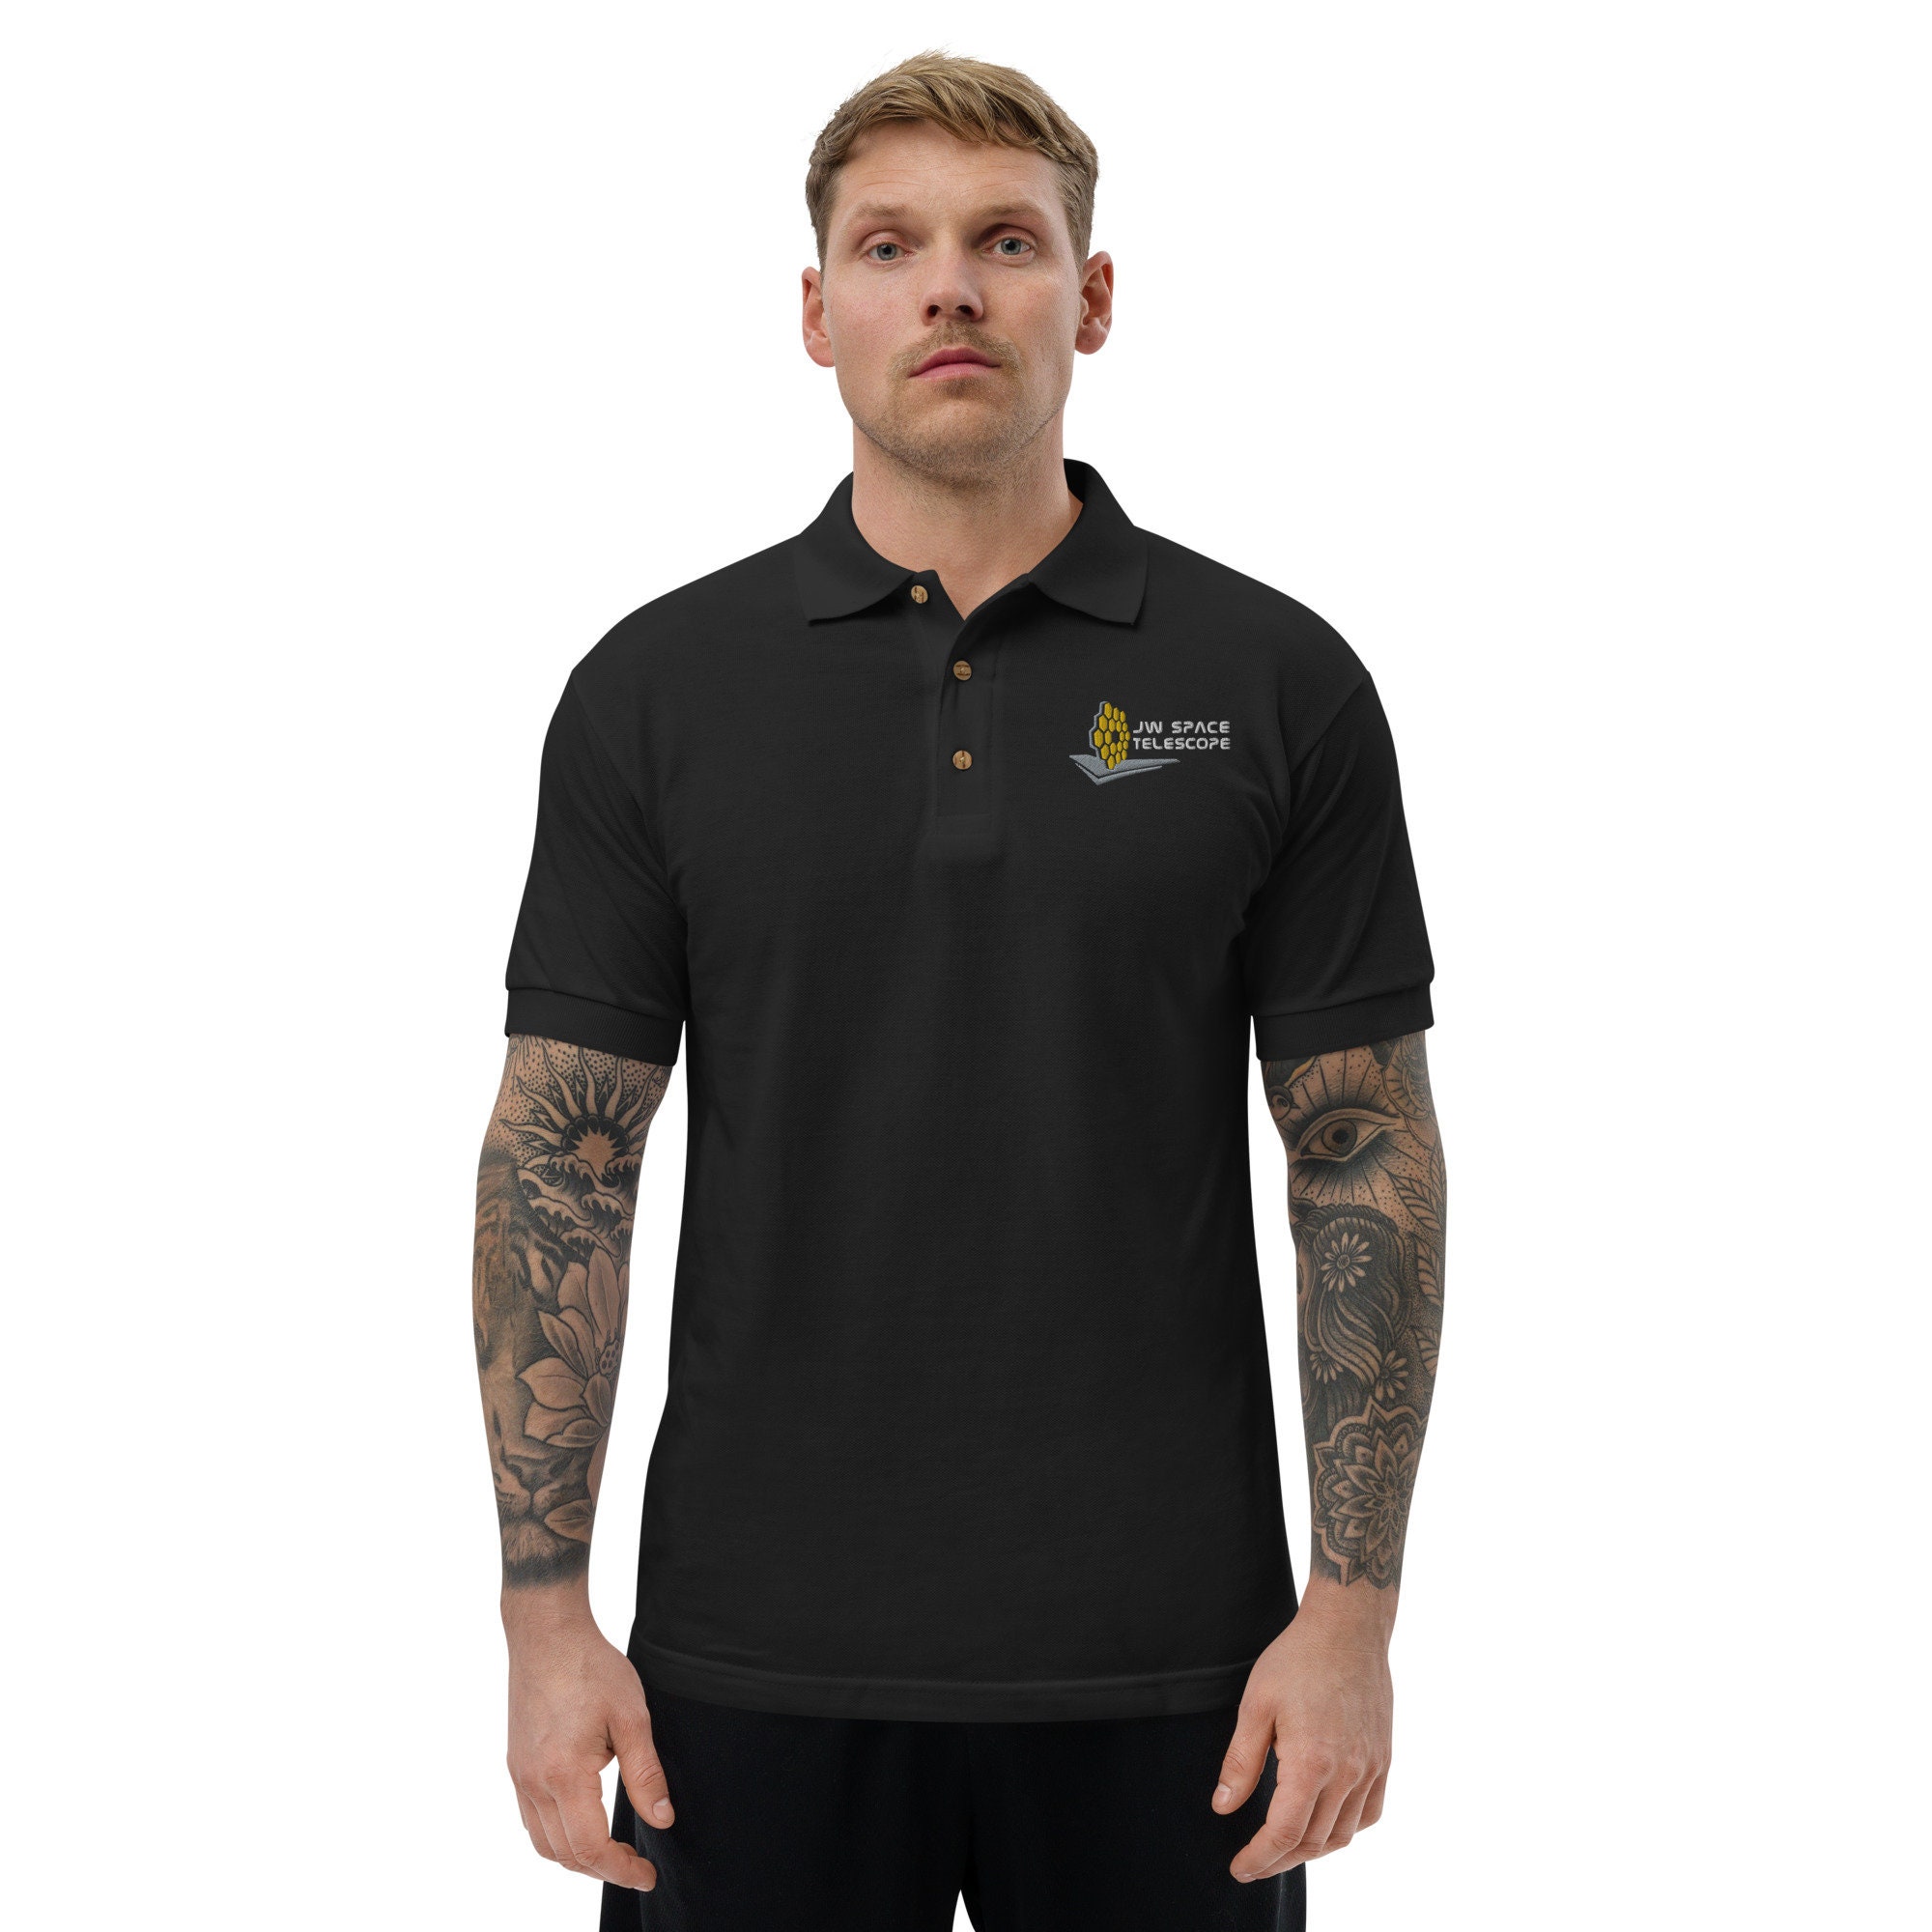 Discover James Webb Space Telescope Embroidered Polo Shirt